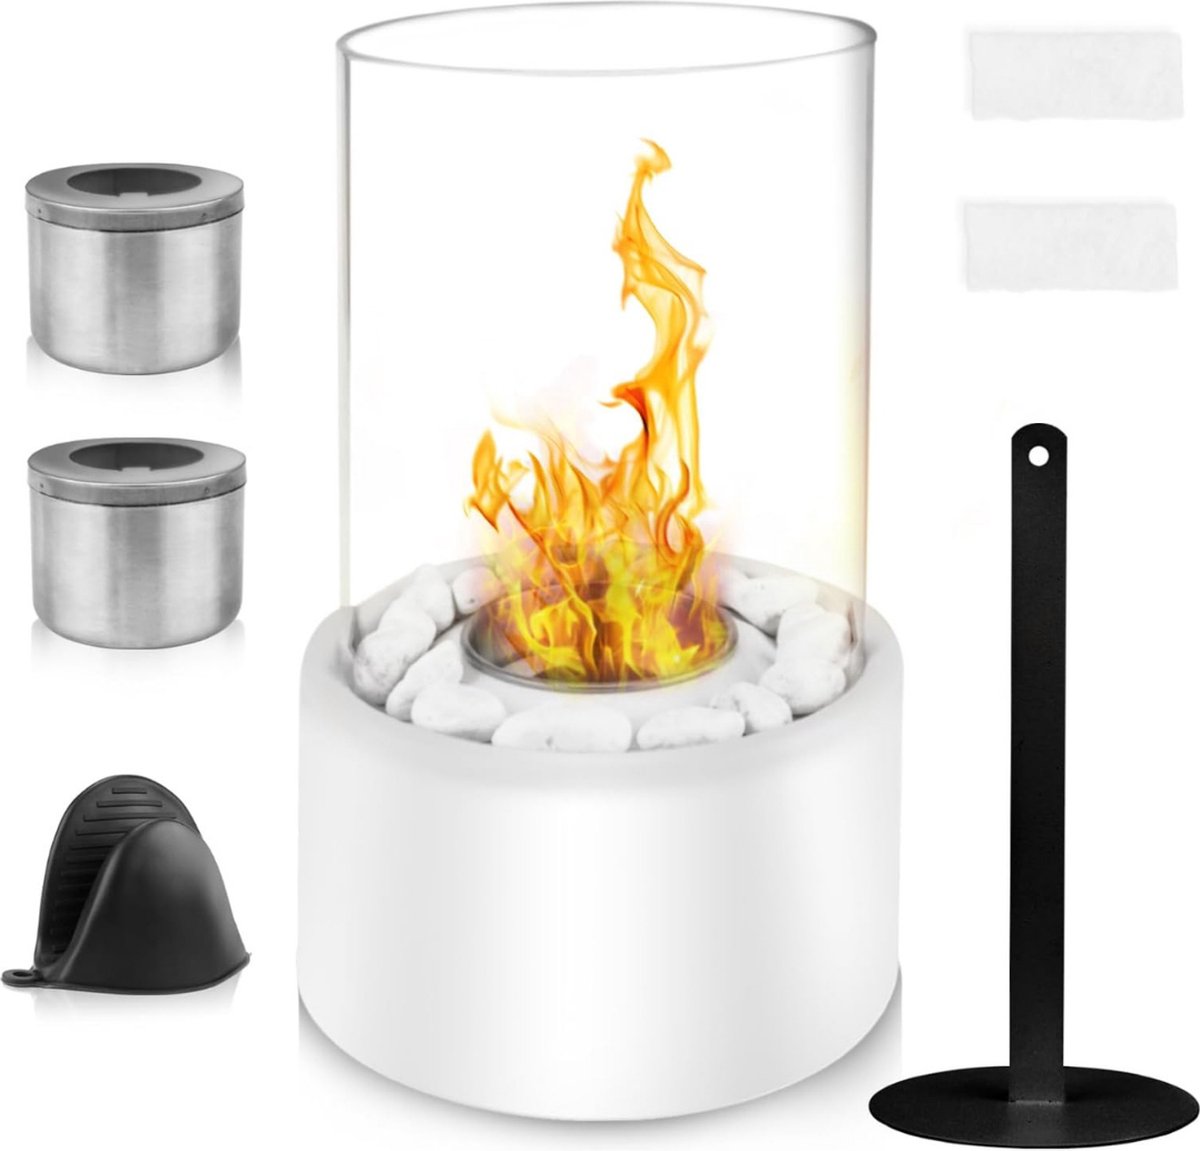 Table Fireplace - Outdoor and Indoor - Infinite Burning Time - Bioethanol Fireplace - Bio-Ethanol Table Fireplace - 2 Combustion Chambers - Safety Glass - White